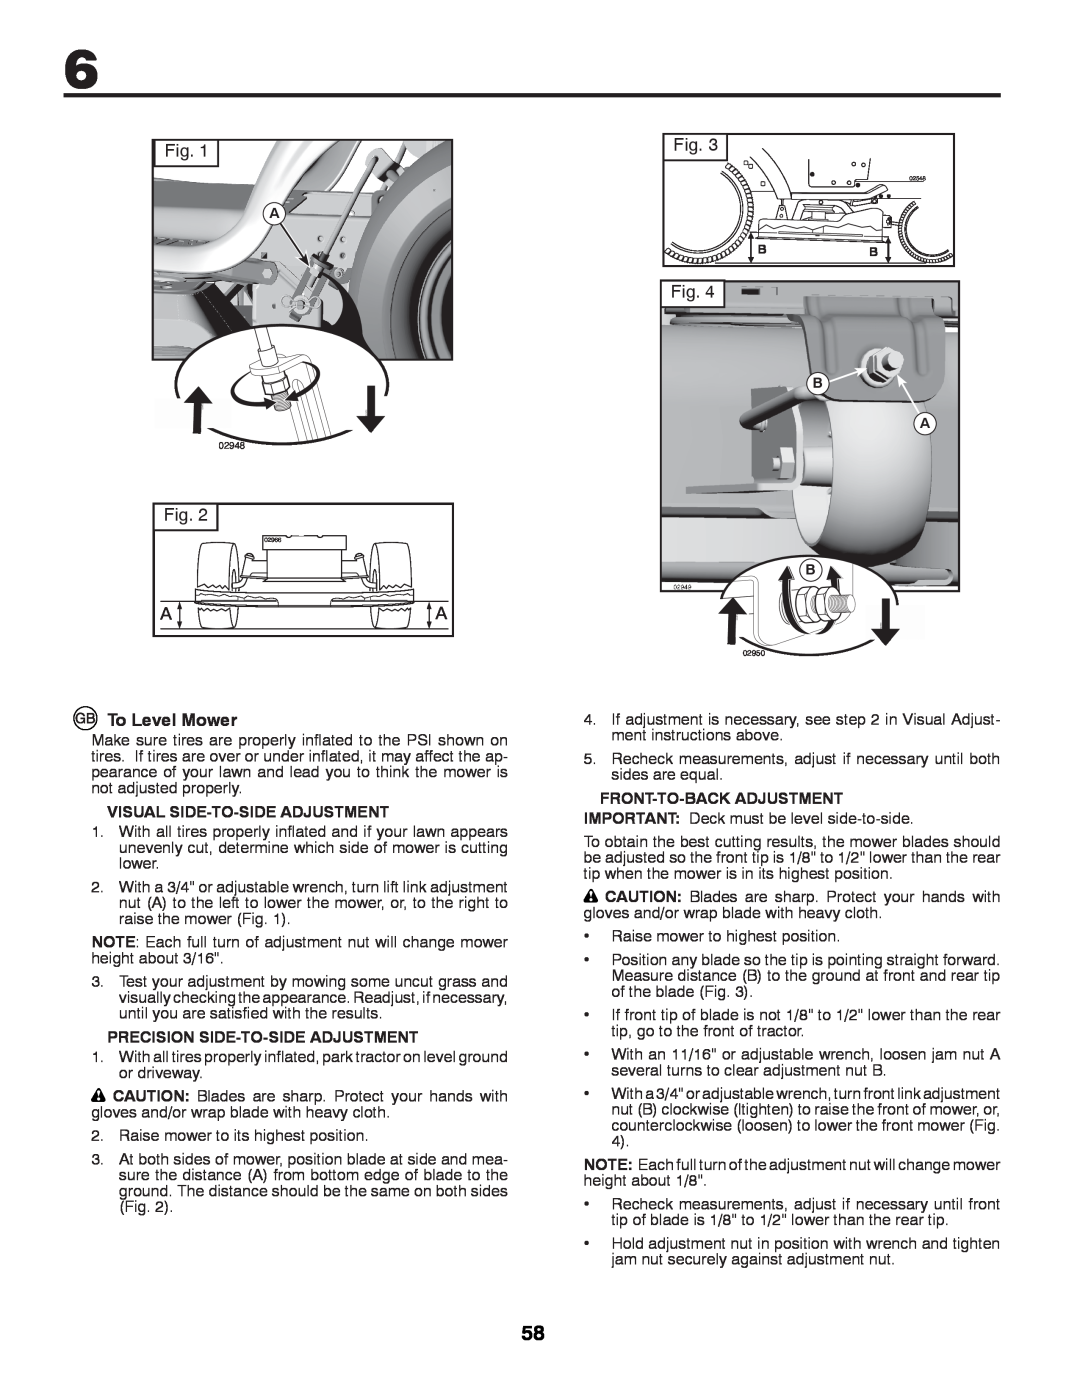 McCulloch 532 43 42-91 Rev. 1 instruction manual Fig, To Level Mower 